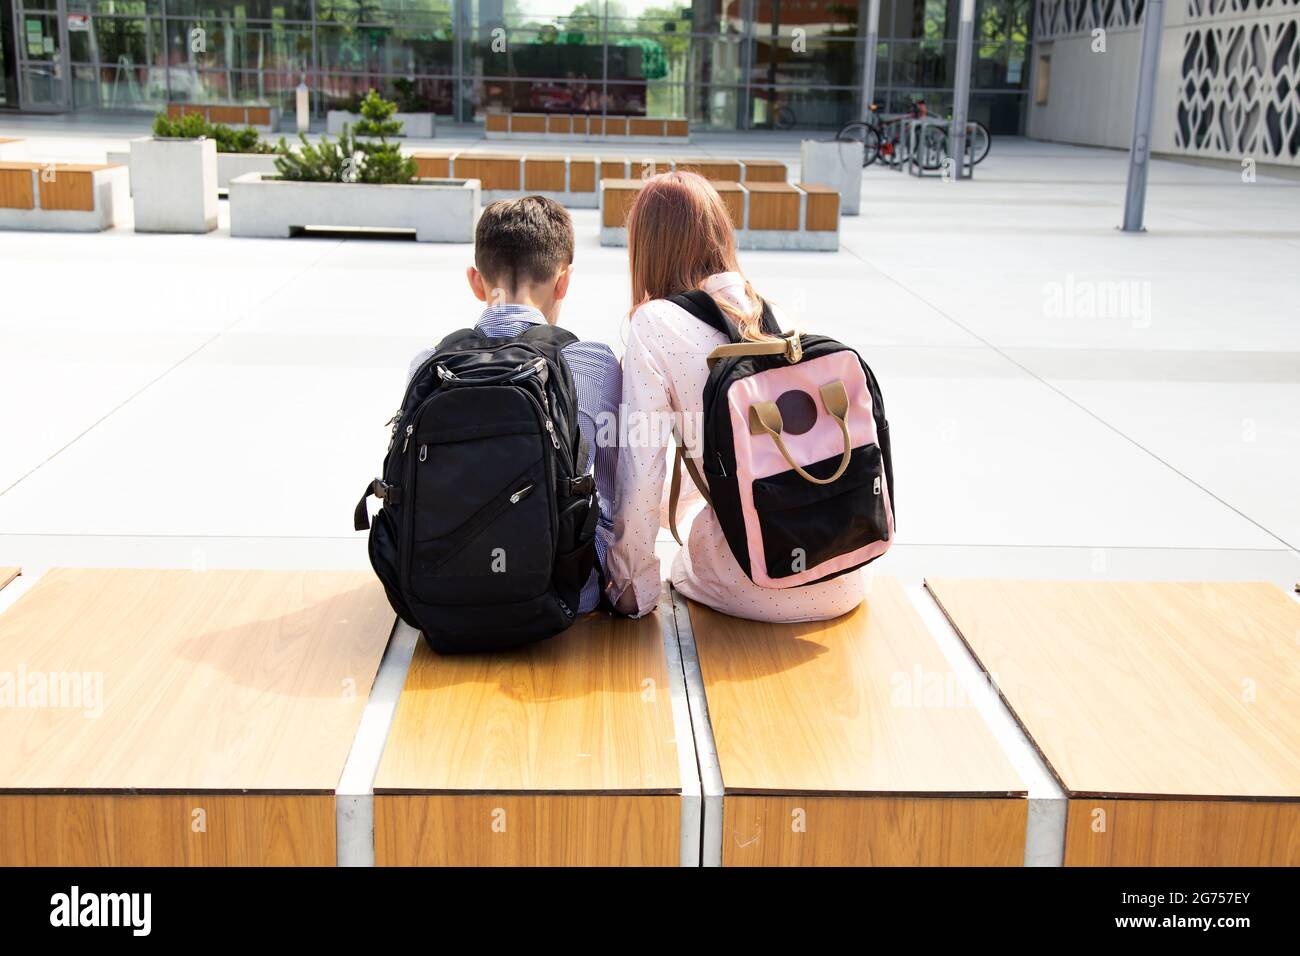 Schoolchildren girl and boy sit with school backpacks on wooden bench among concrete walls with backpacks on their backs, rear view Stock Photo